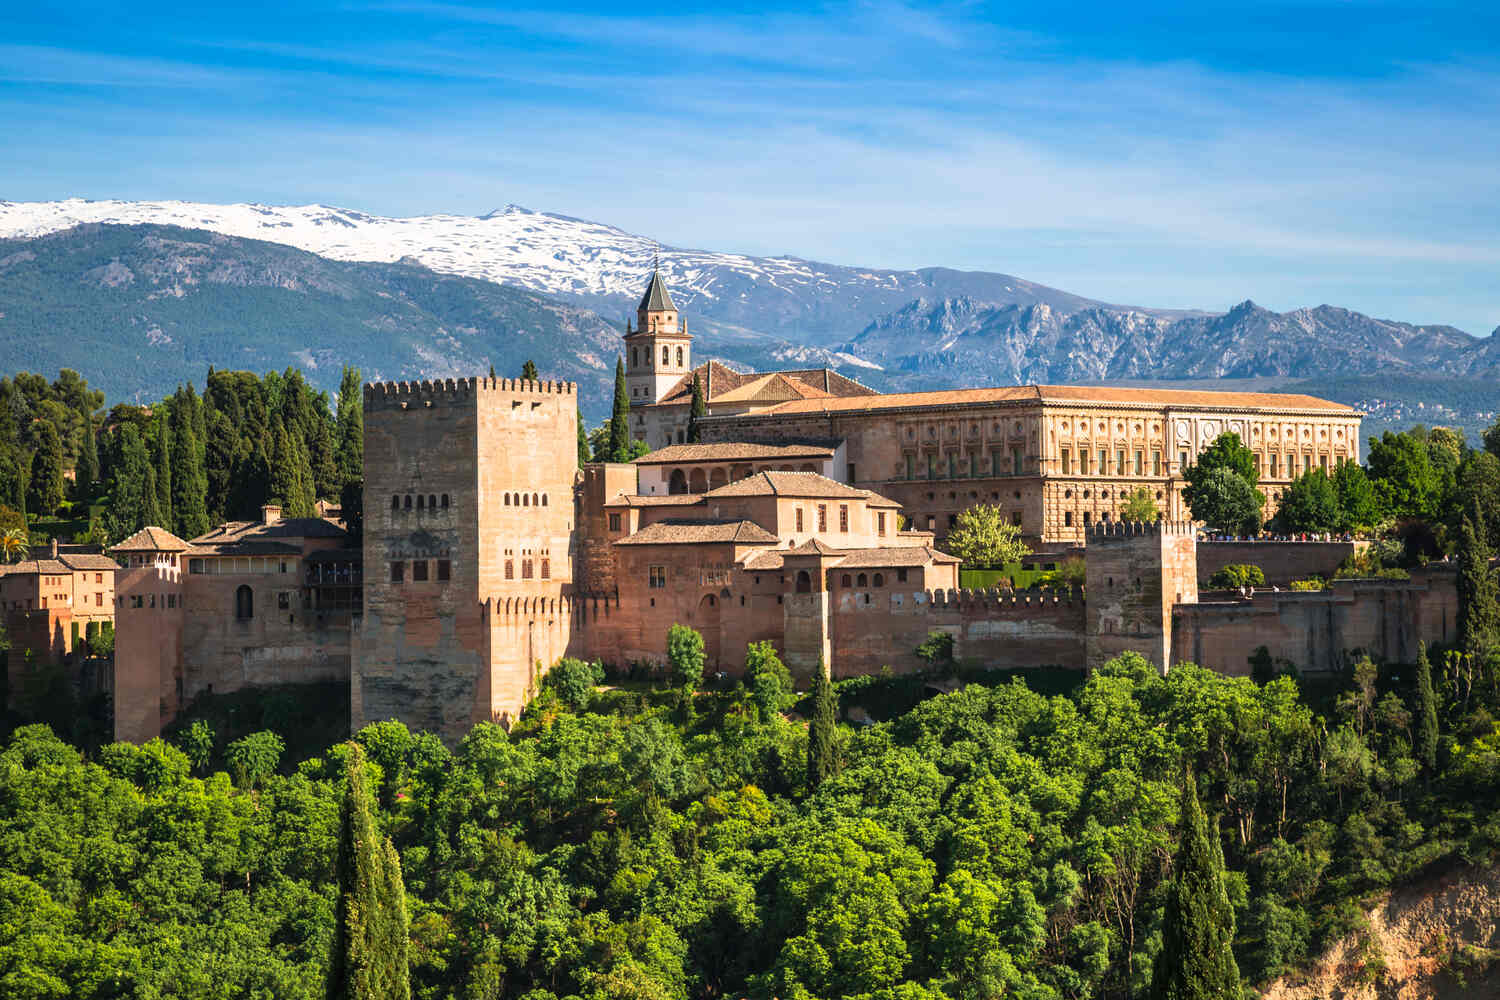 Alhambra in Granada, Aerial view of Alhambra palace with snow-capped Sierra Nevada mountains behind.